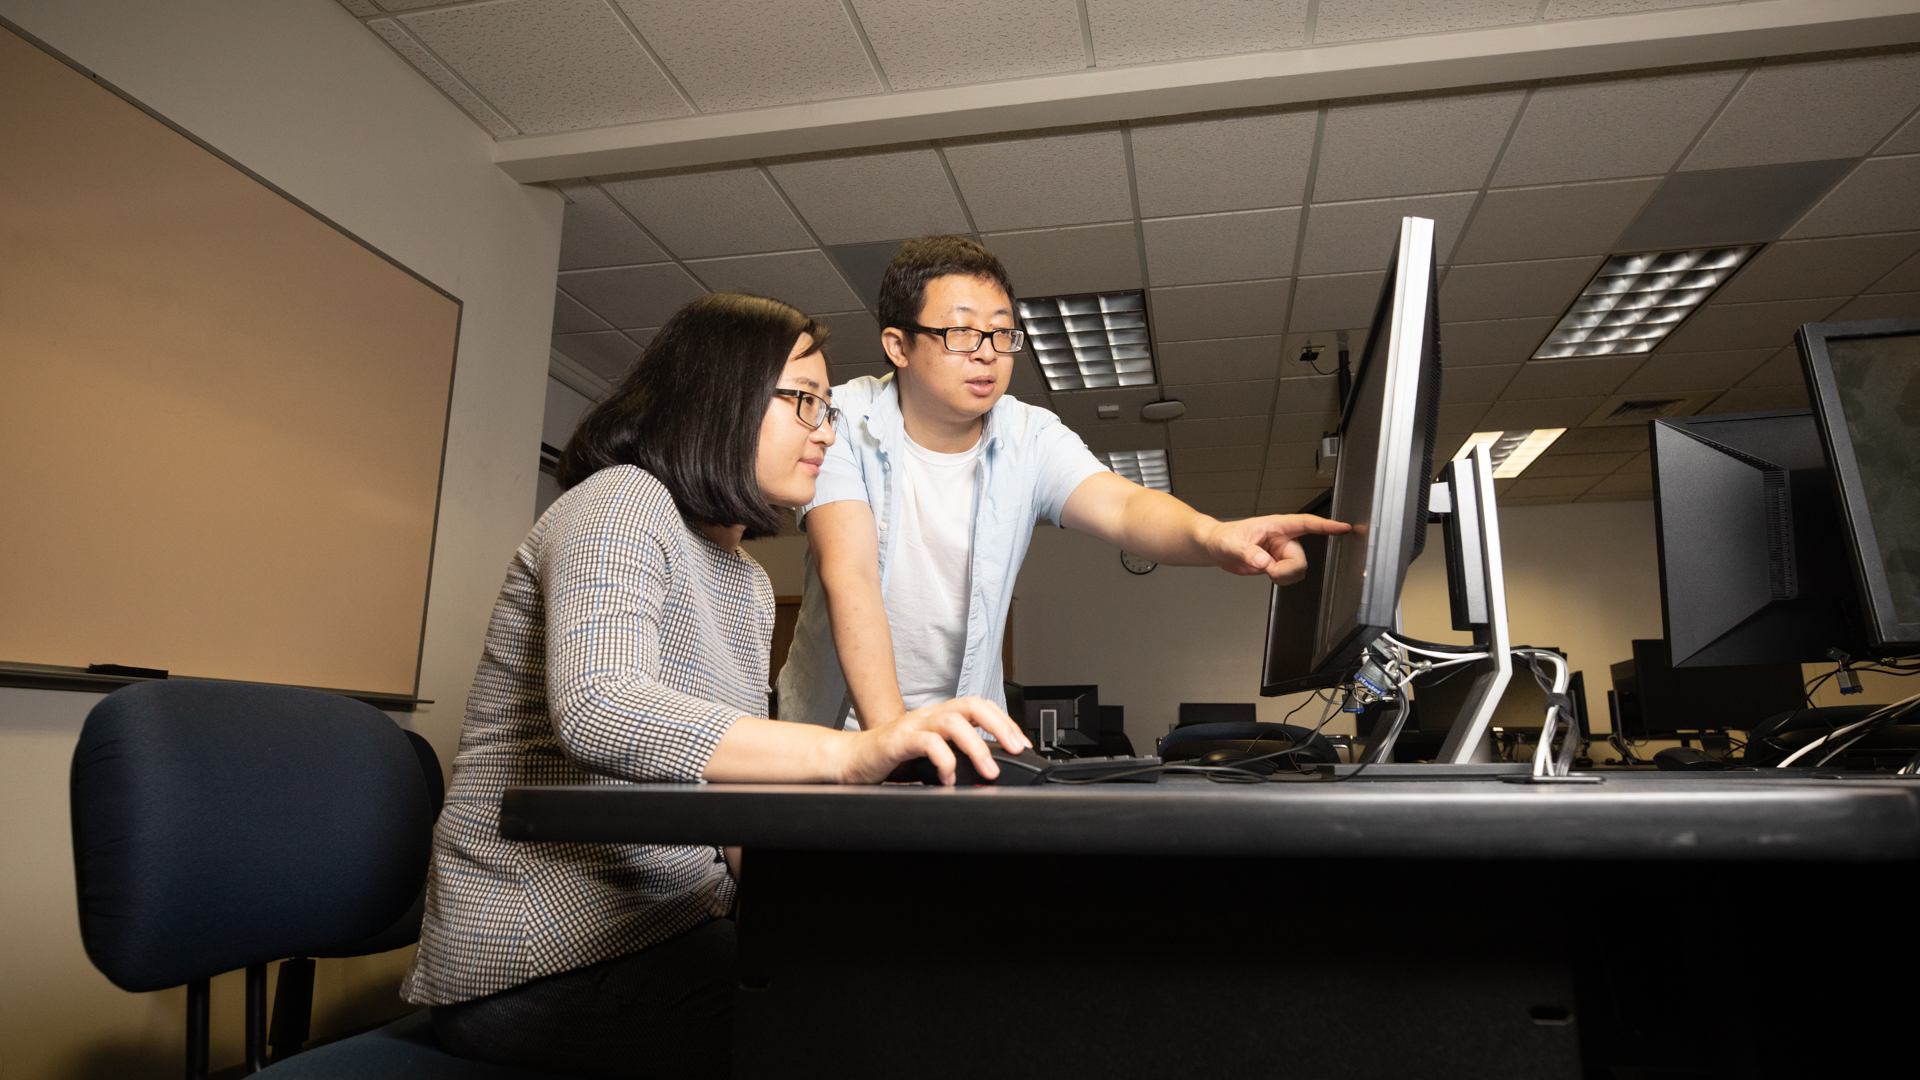 Sacramento State Computer Science professors Xiaoyan “Sherry” Sun (sitting down) and Jun Dai work together on a project in a campus computer lab as Sun controls the mouse while Dai points at the screen.